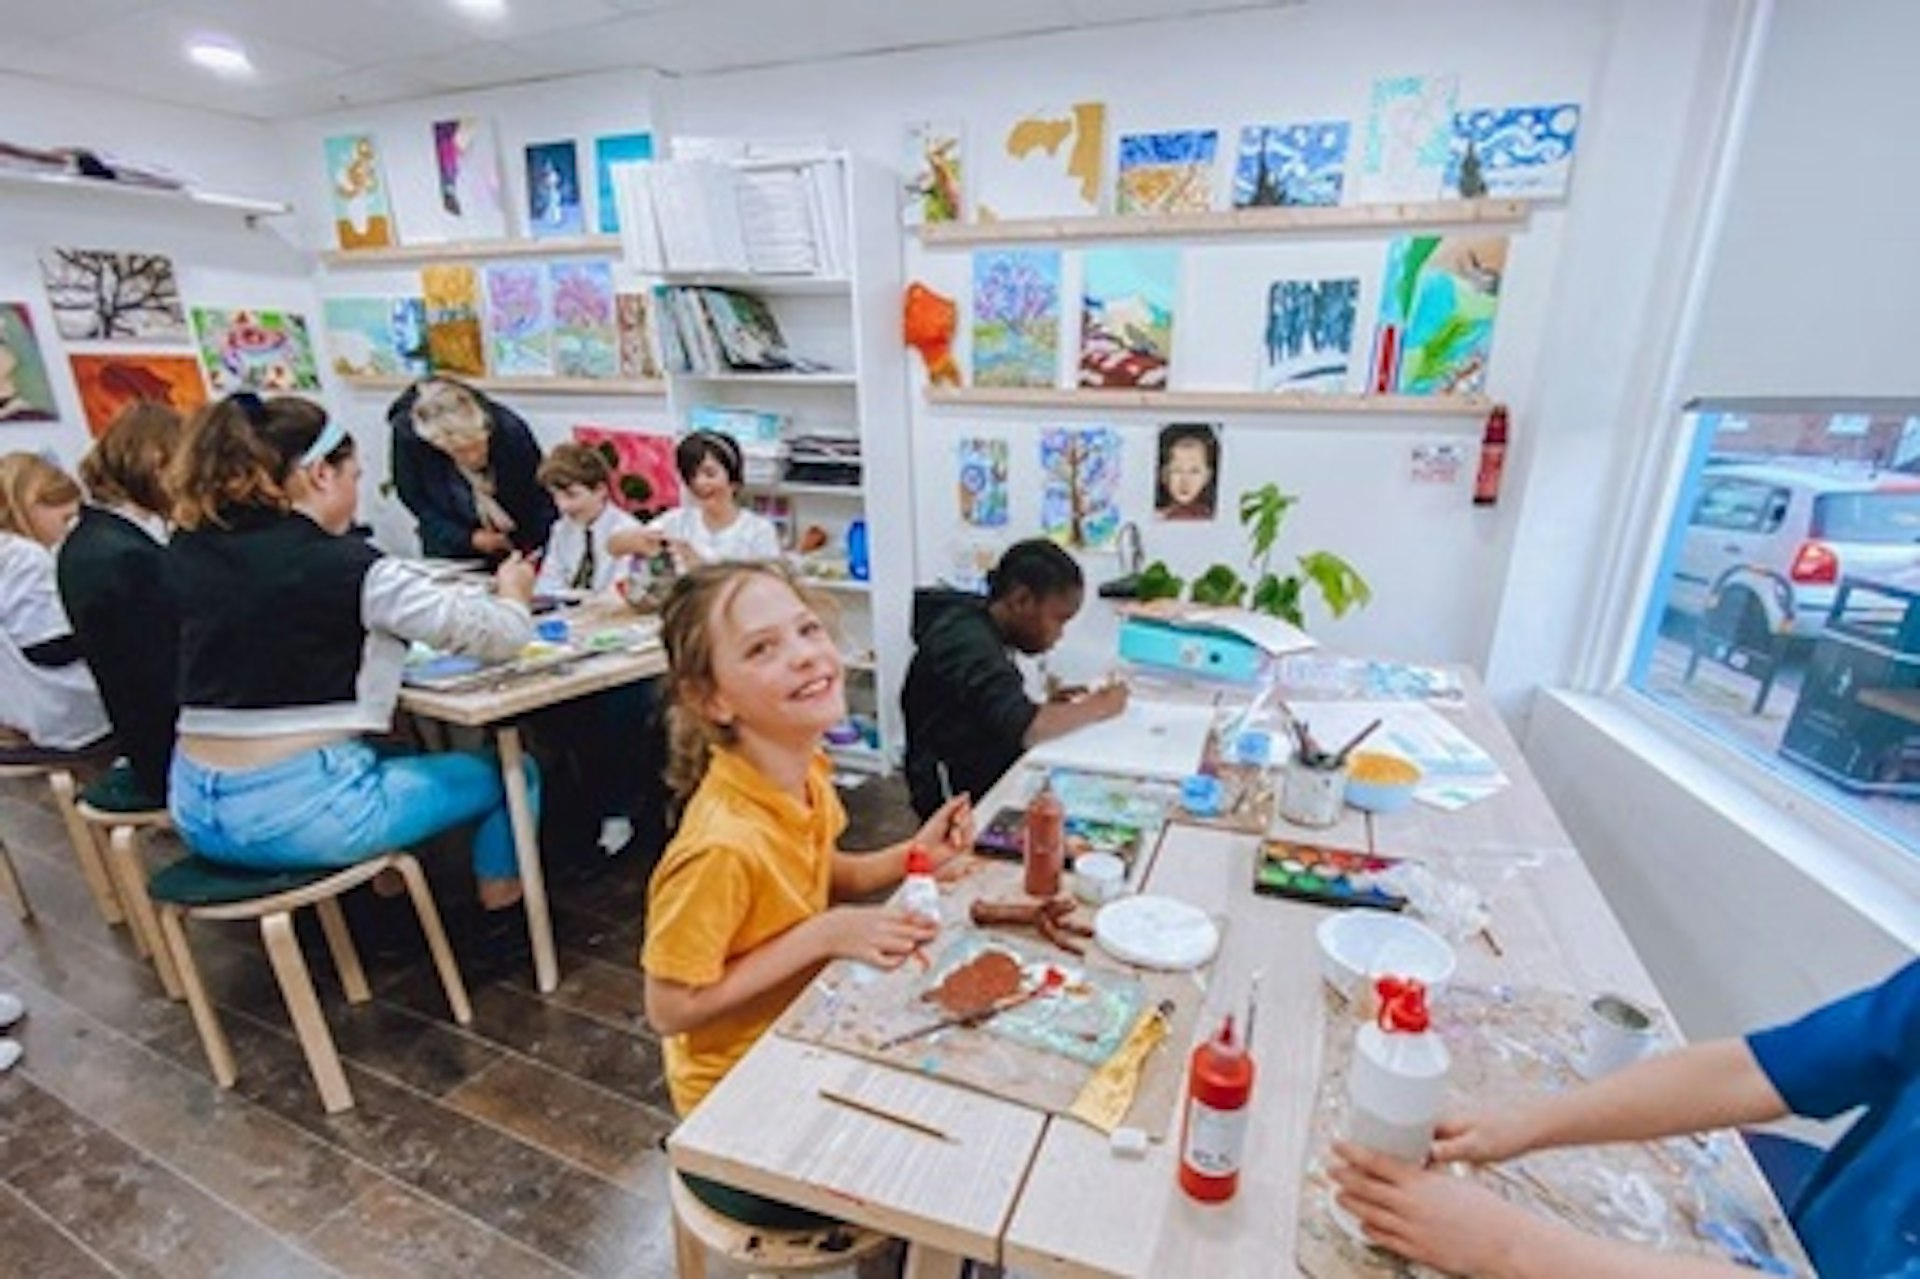 Children's Introductory Art Class with Art-K 2